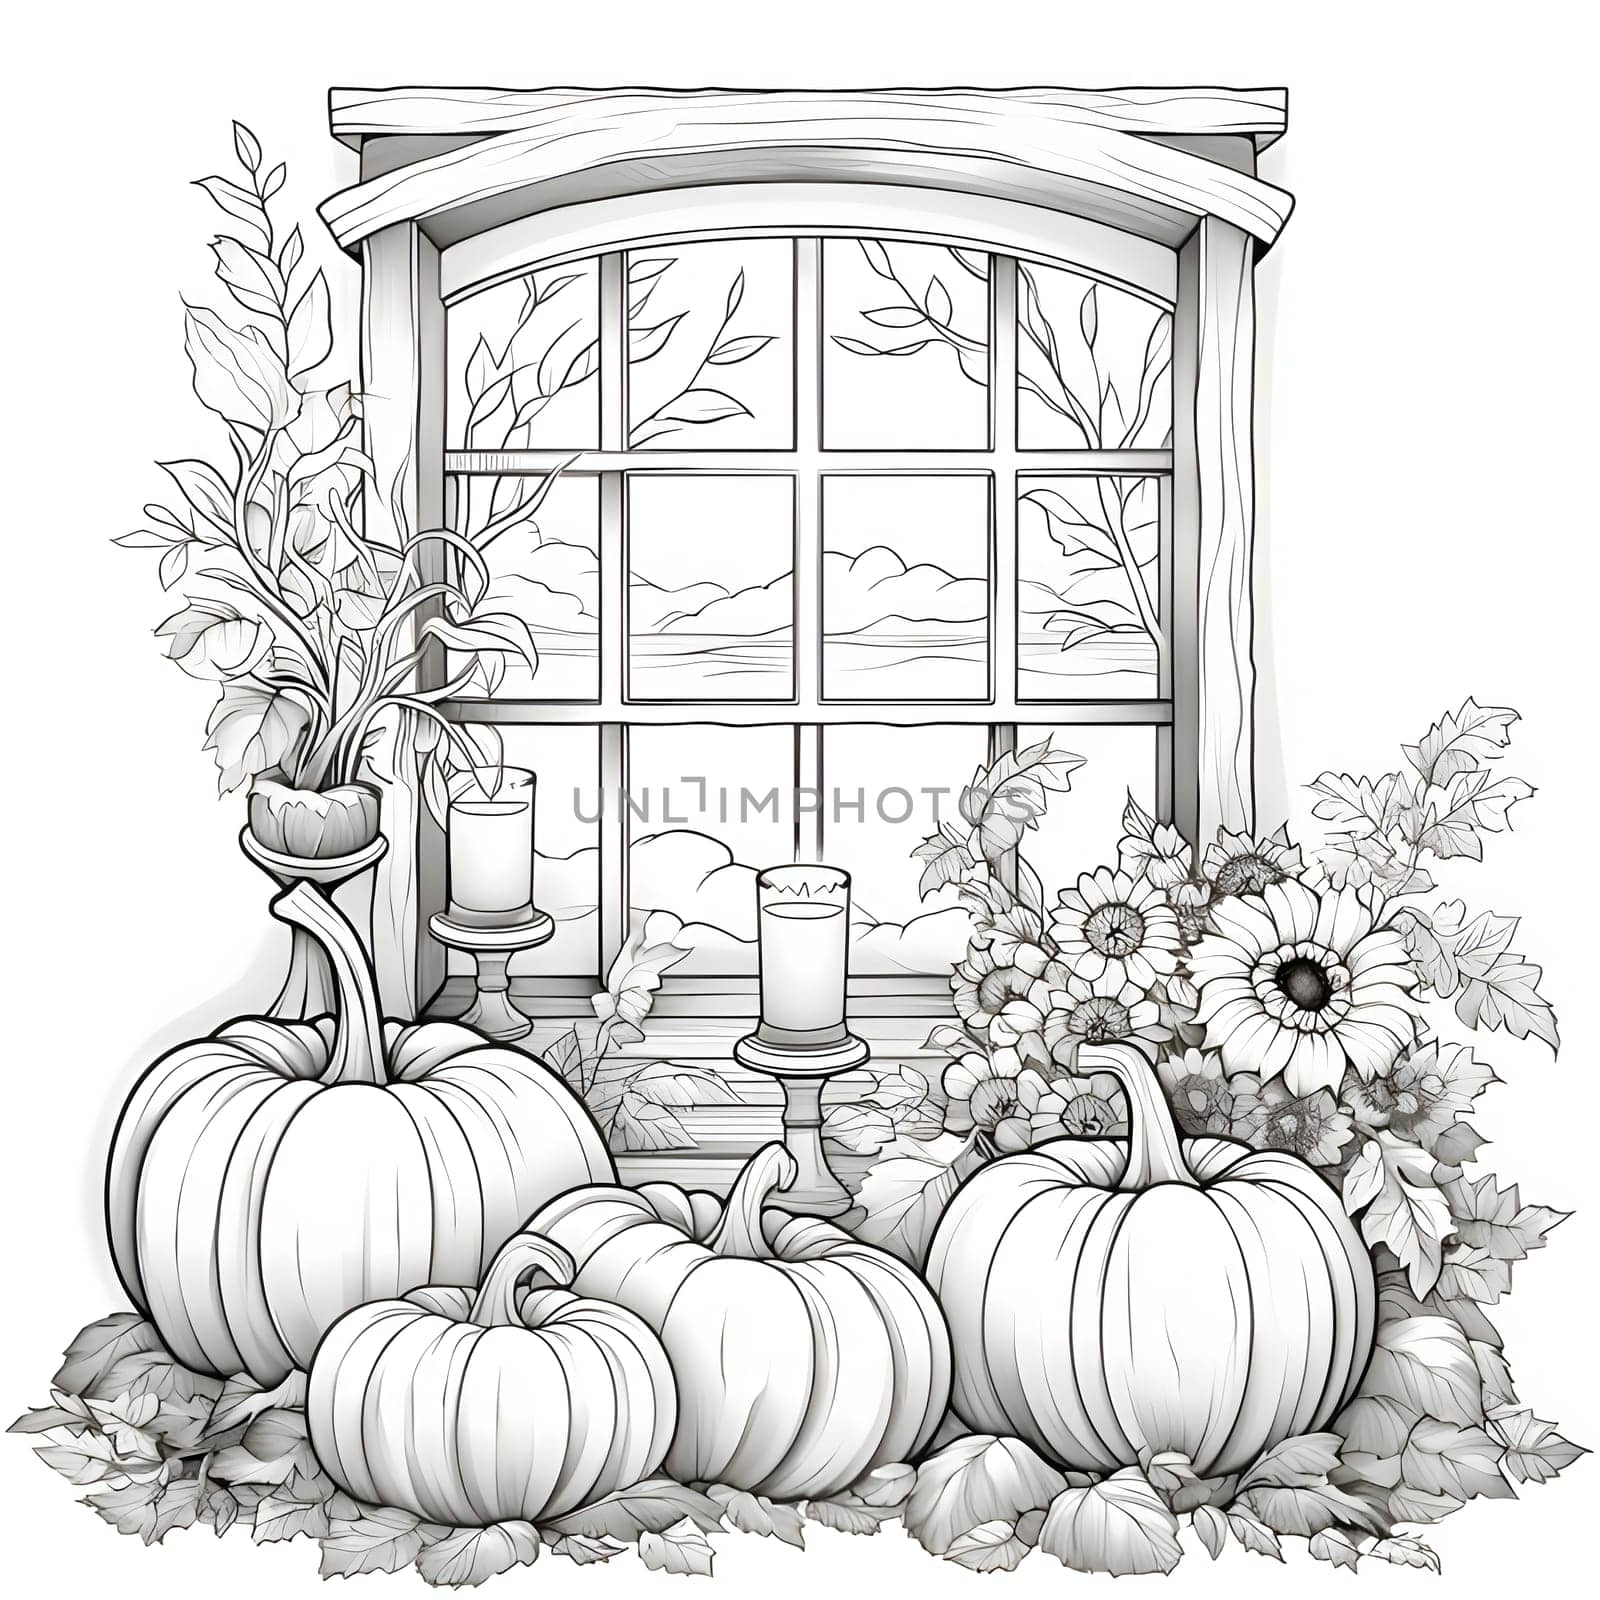 Black and White coloring book on it candles pumpkins flowers in the background window. Pumpkin as a dish of thanksgiving for the harvest, picture on a white isolated background. An atmosphere of joy and celebration.